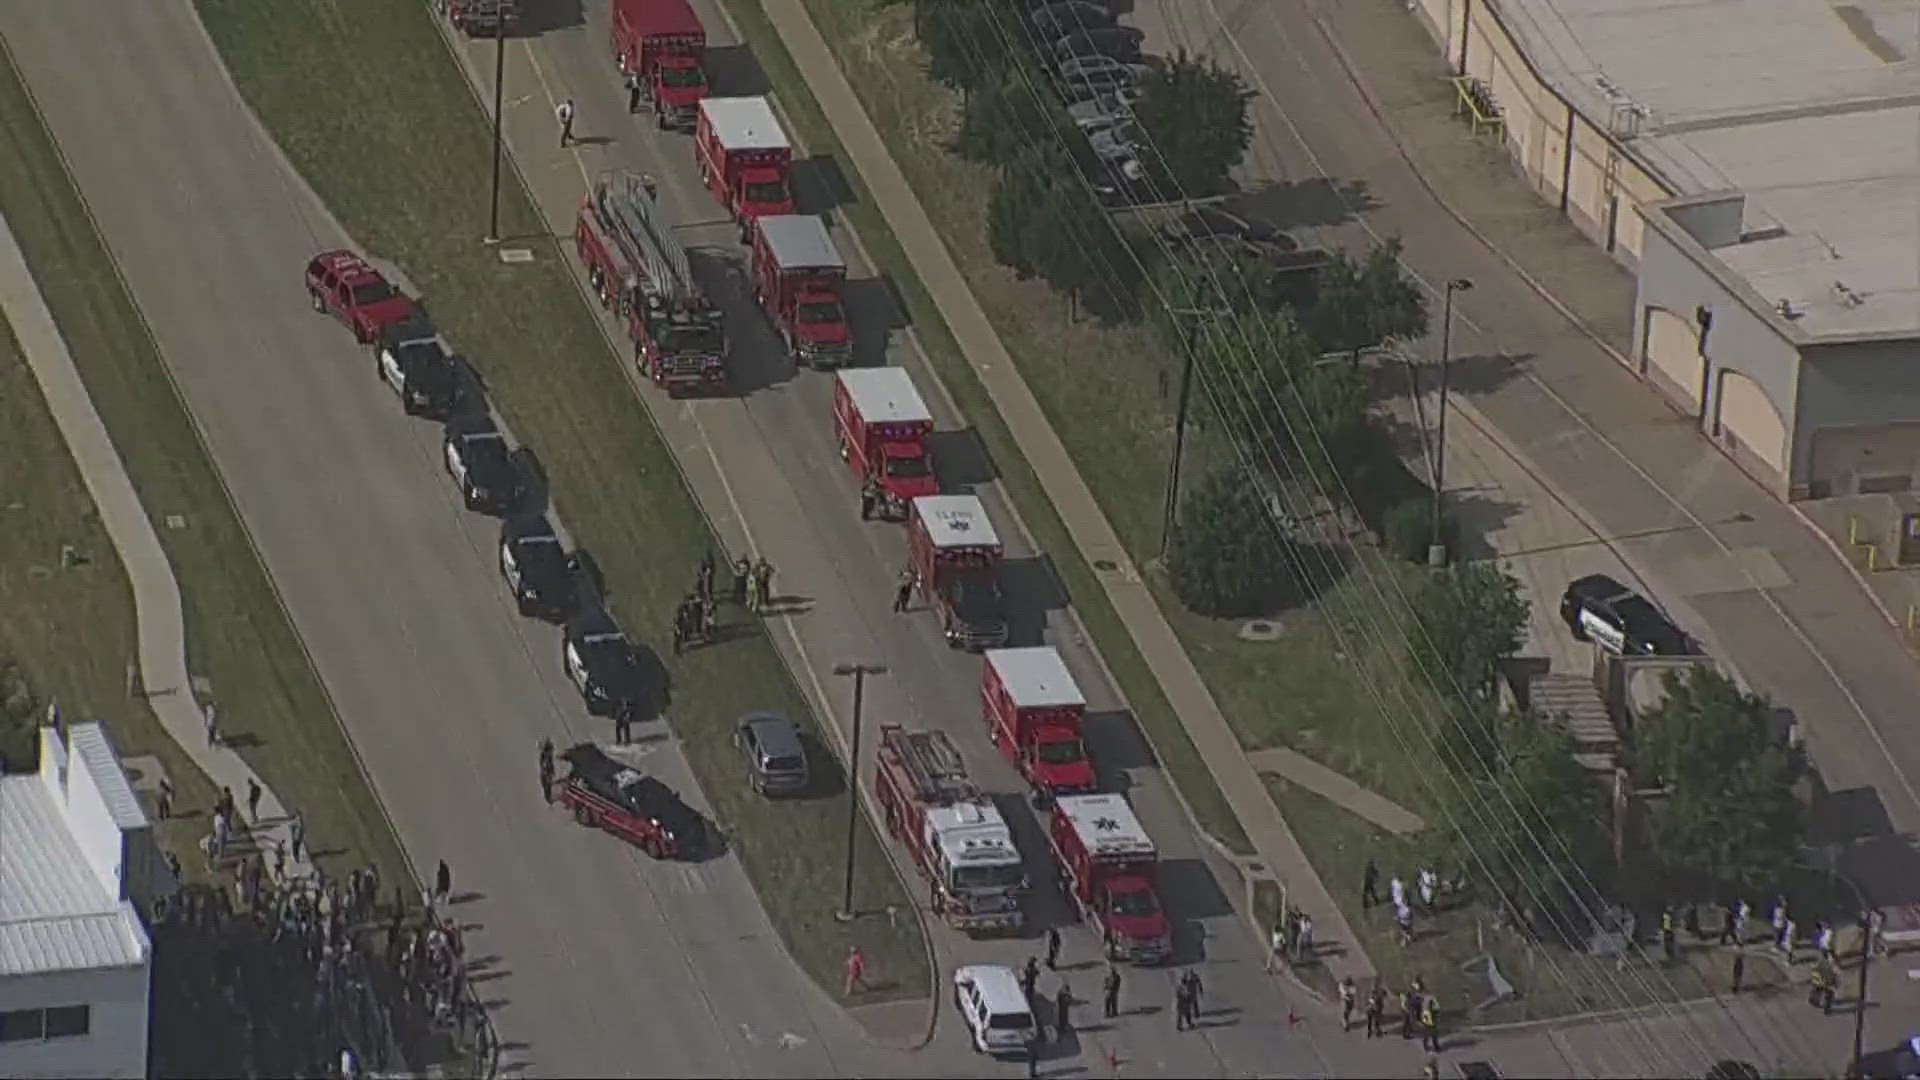 According to reports, the shooting occurred at about 3:30 p.m. at Allen Premium Outlets located at 820 W. Stacy Road.